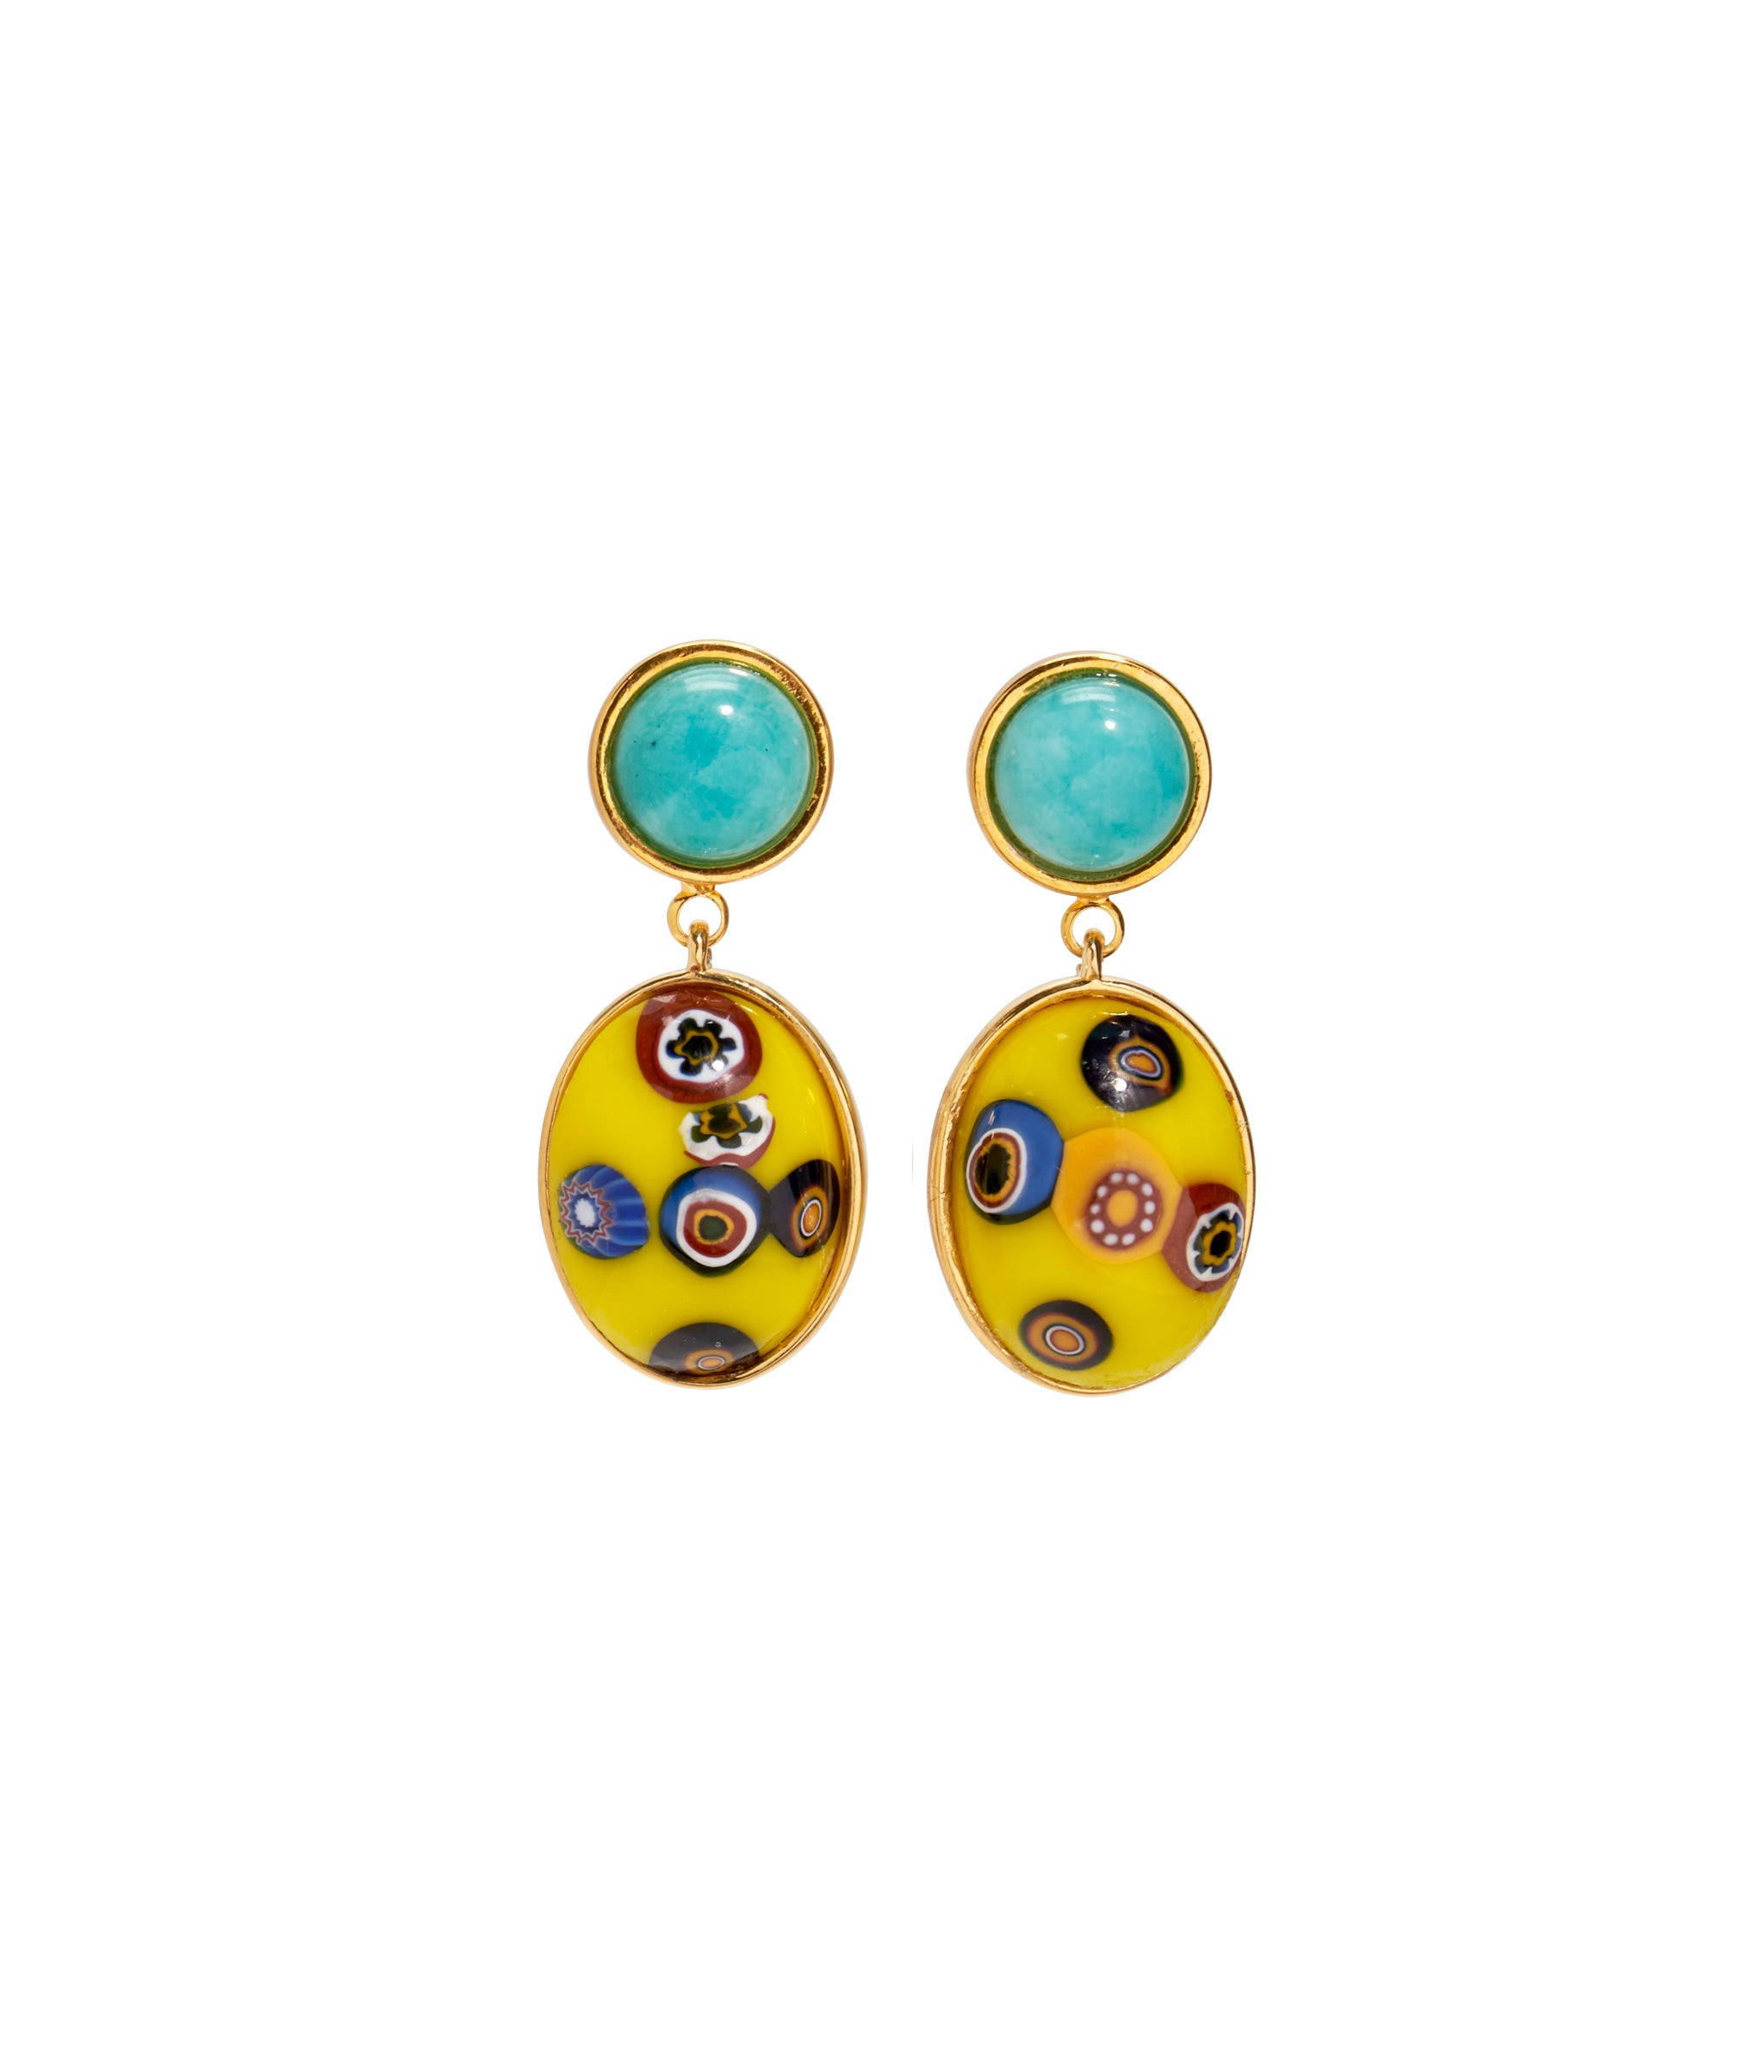 Murano Muse Earrings in Daylight. Imitation turquoise tops and colorful yellow millefiori glass drops.